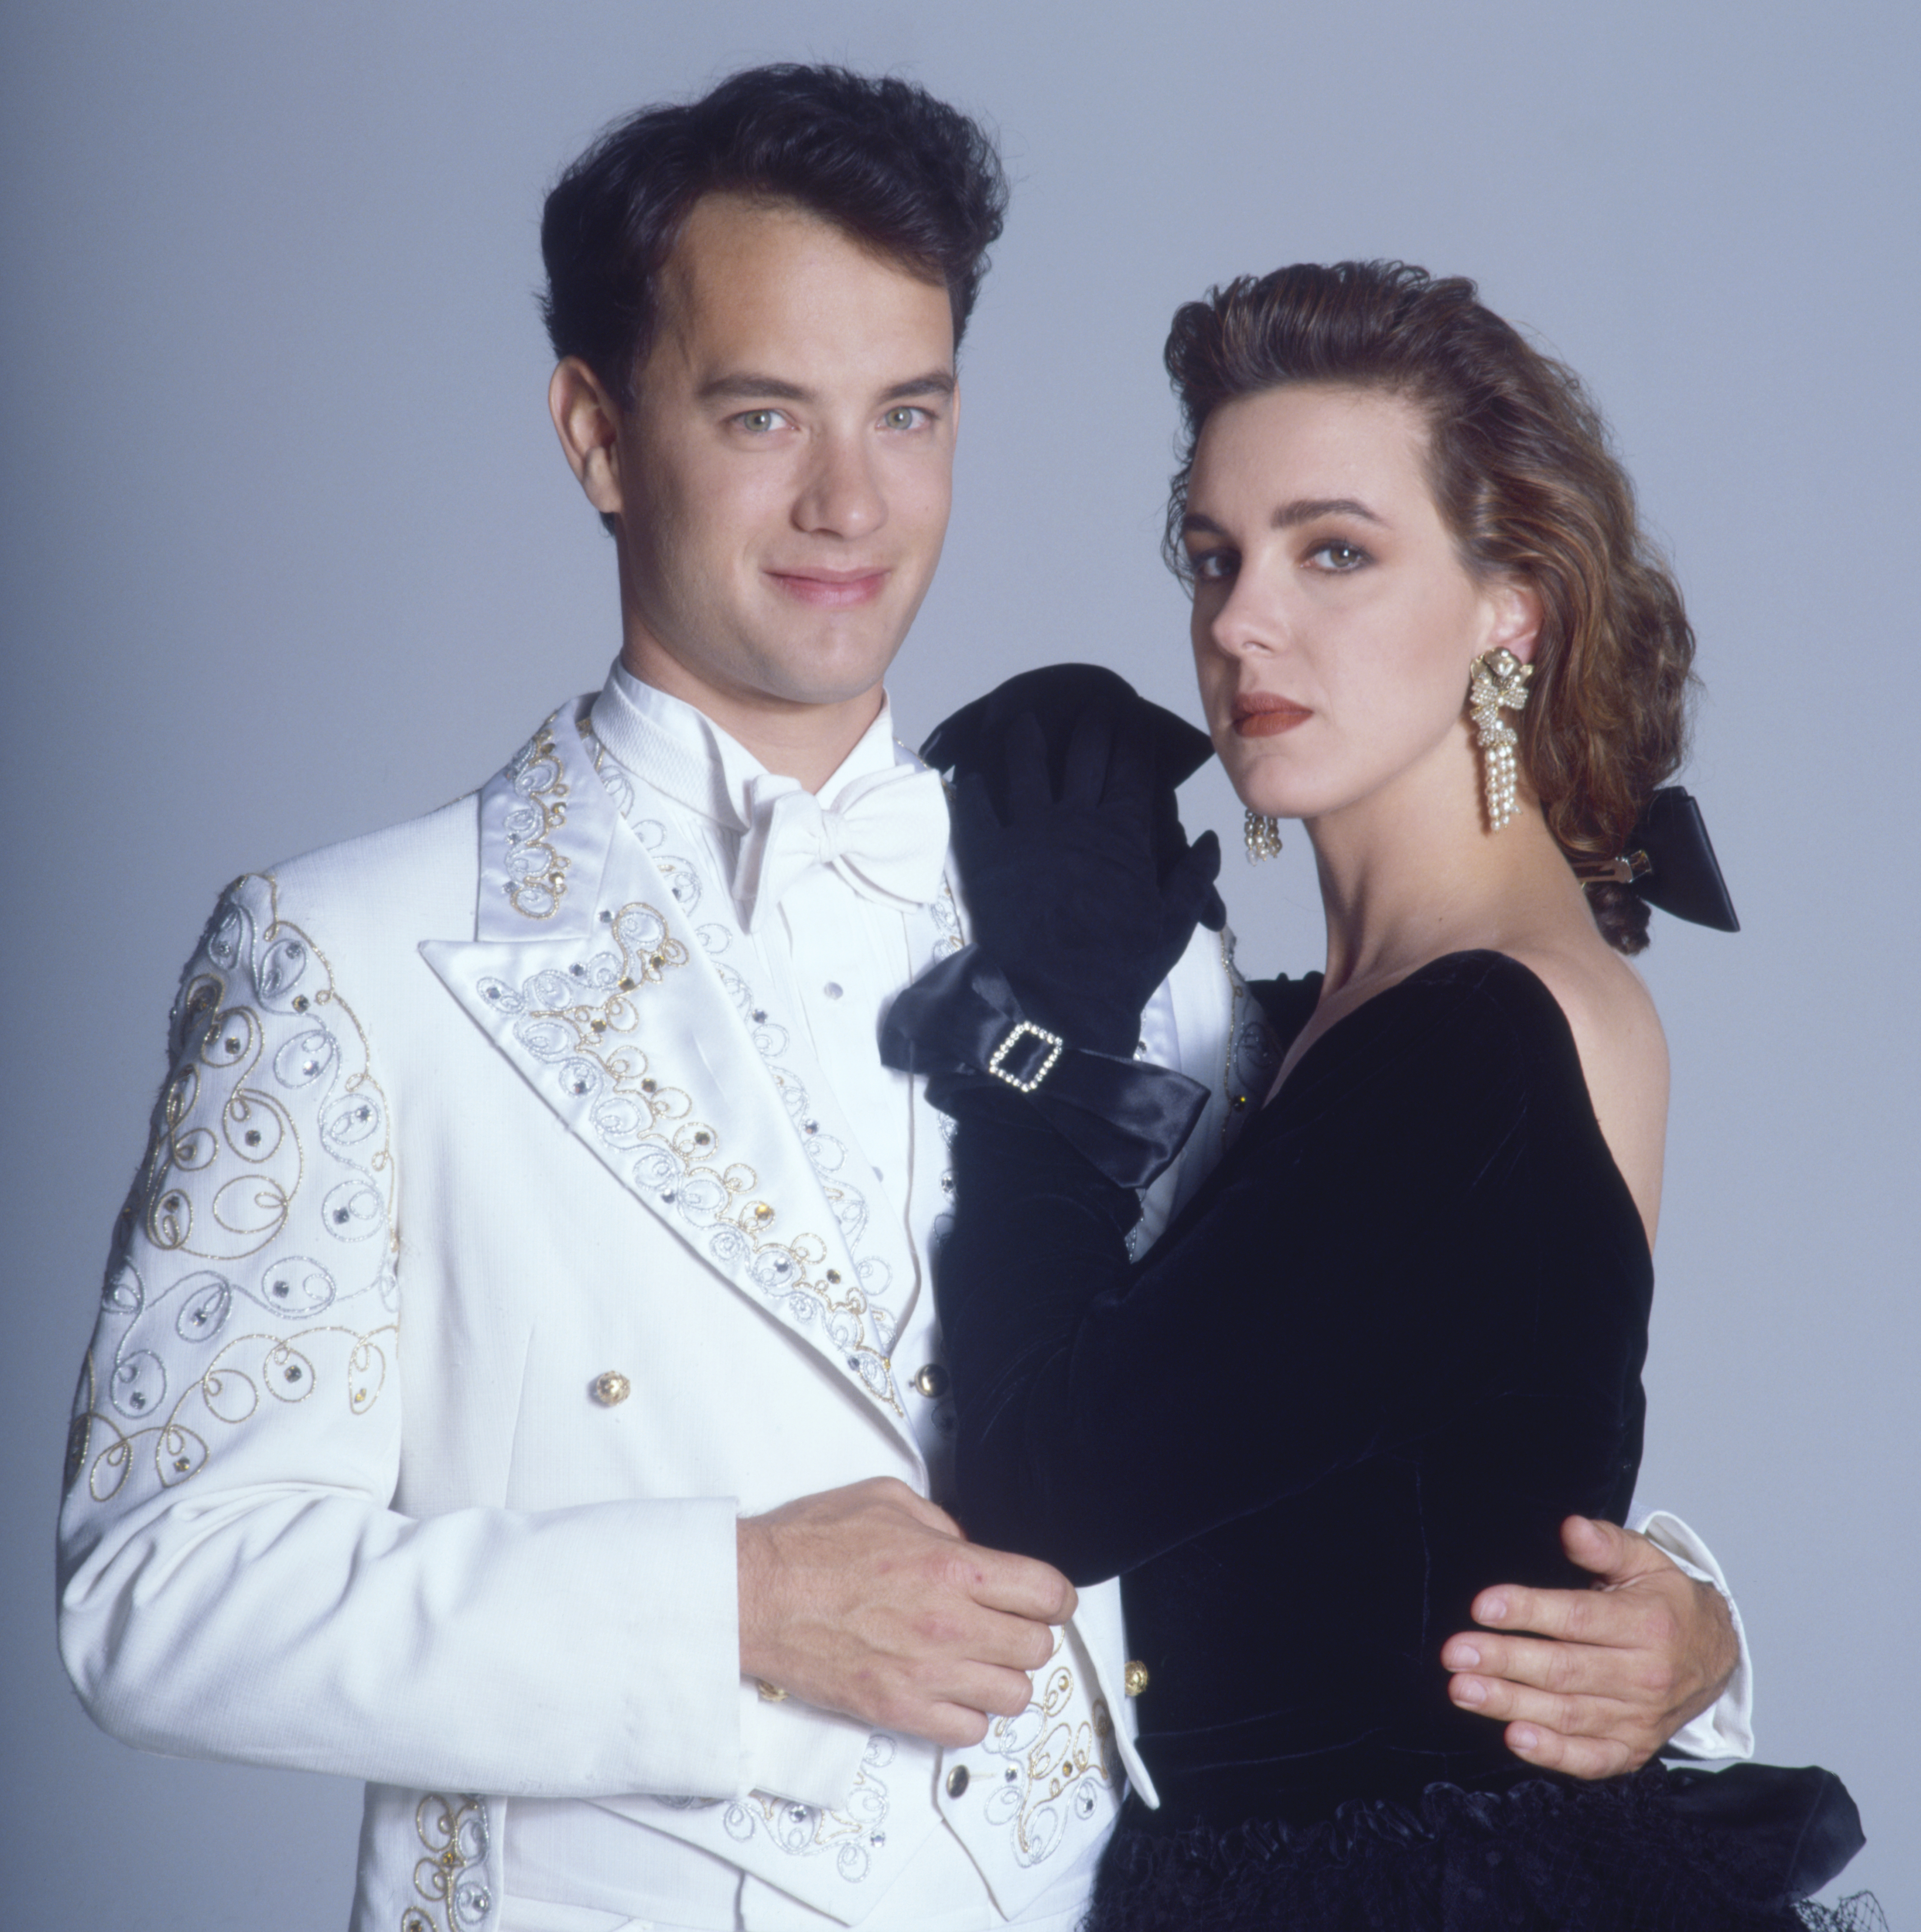 Tom Hanks and Elizabeth Perkins promoting their film "Big" in 1988 | Source: Getty Images